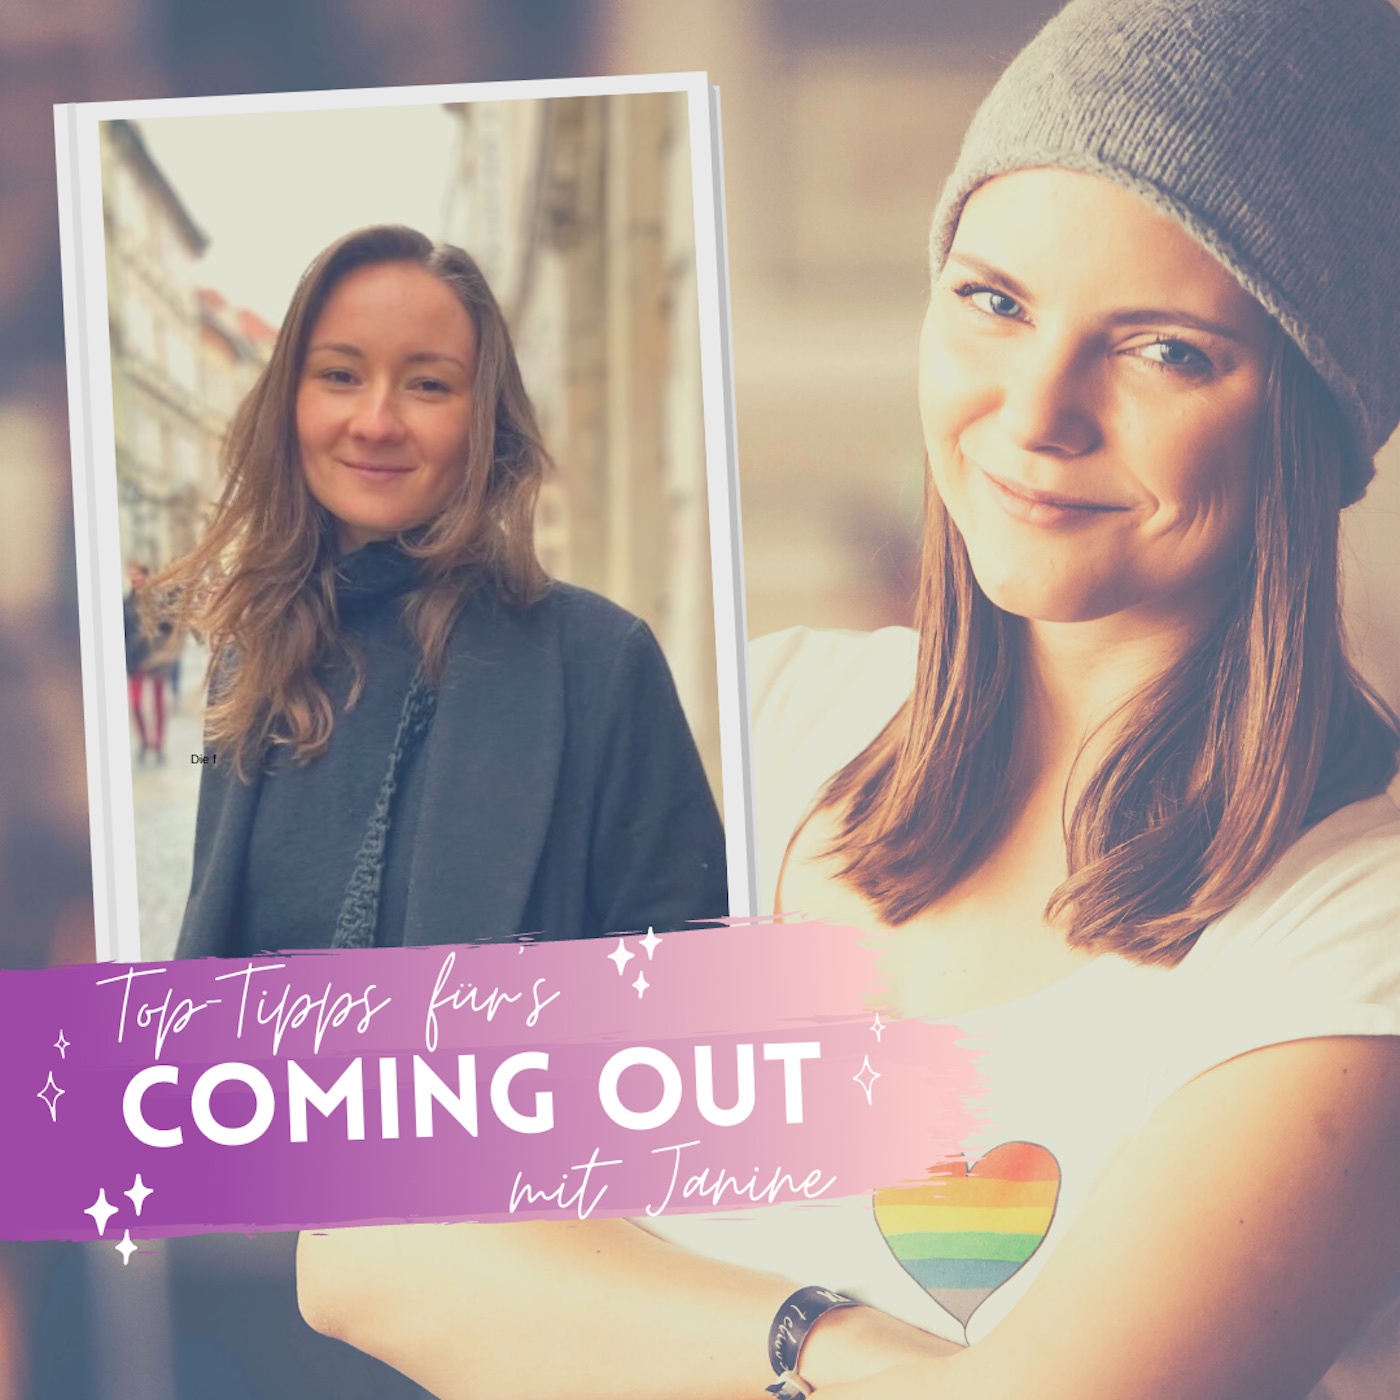 Top-Tipps für's Coming-out